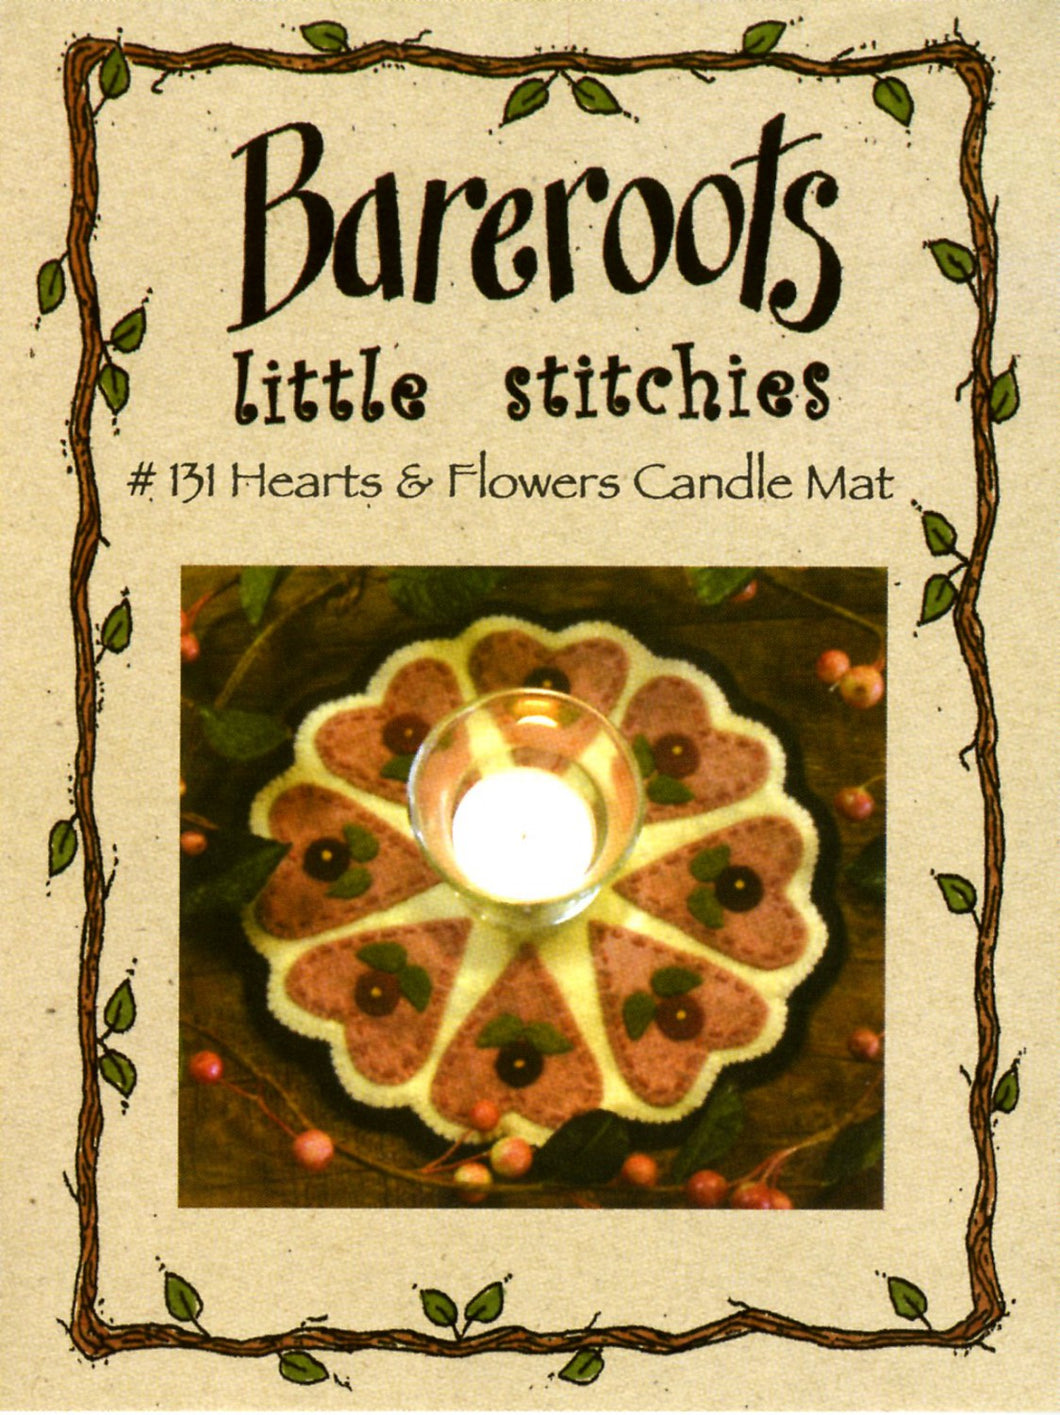 Hearts & Flowers Candle Mat by Bareroots